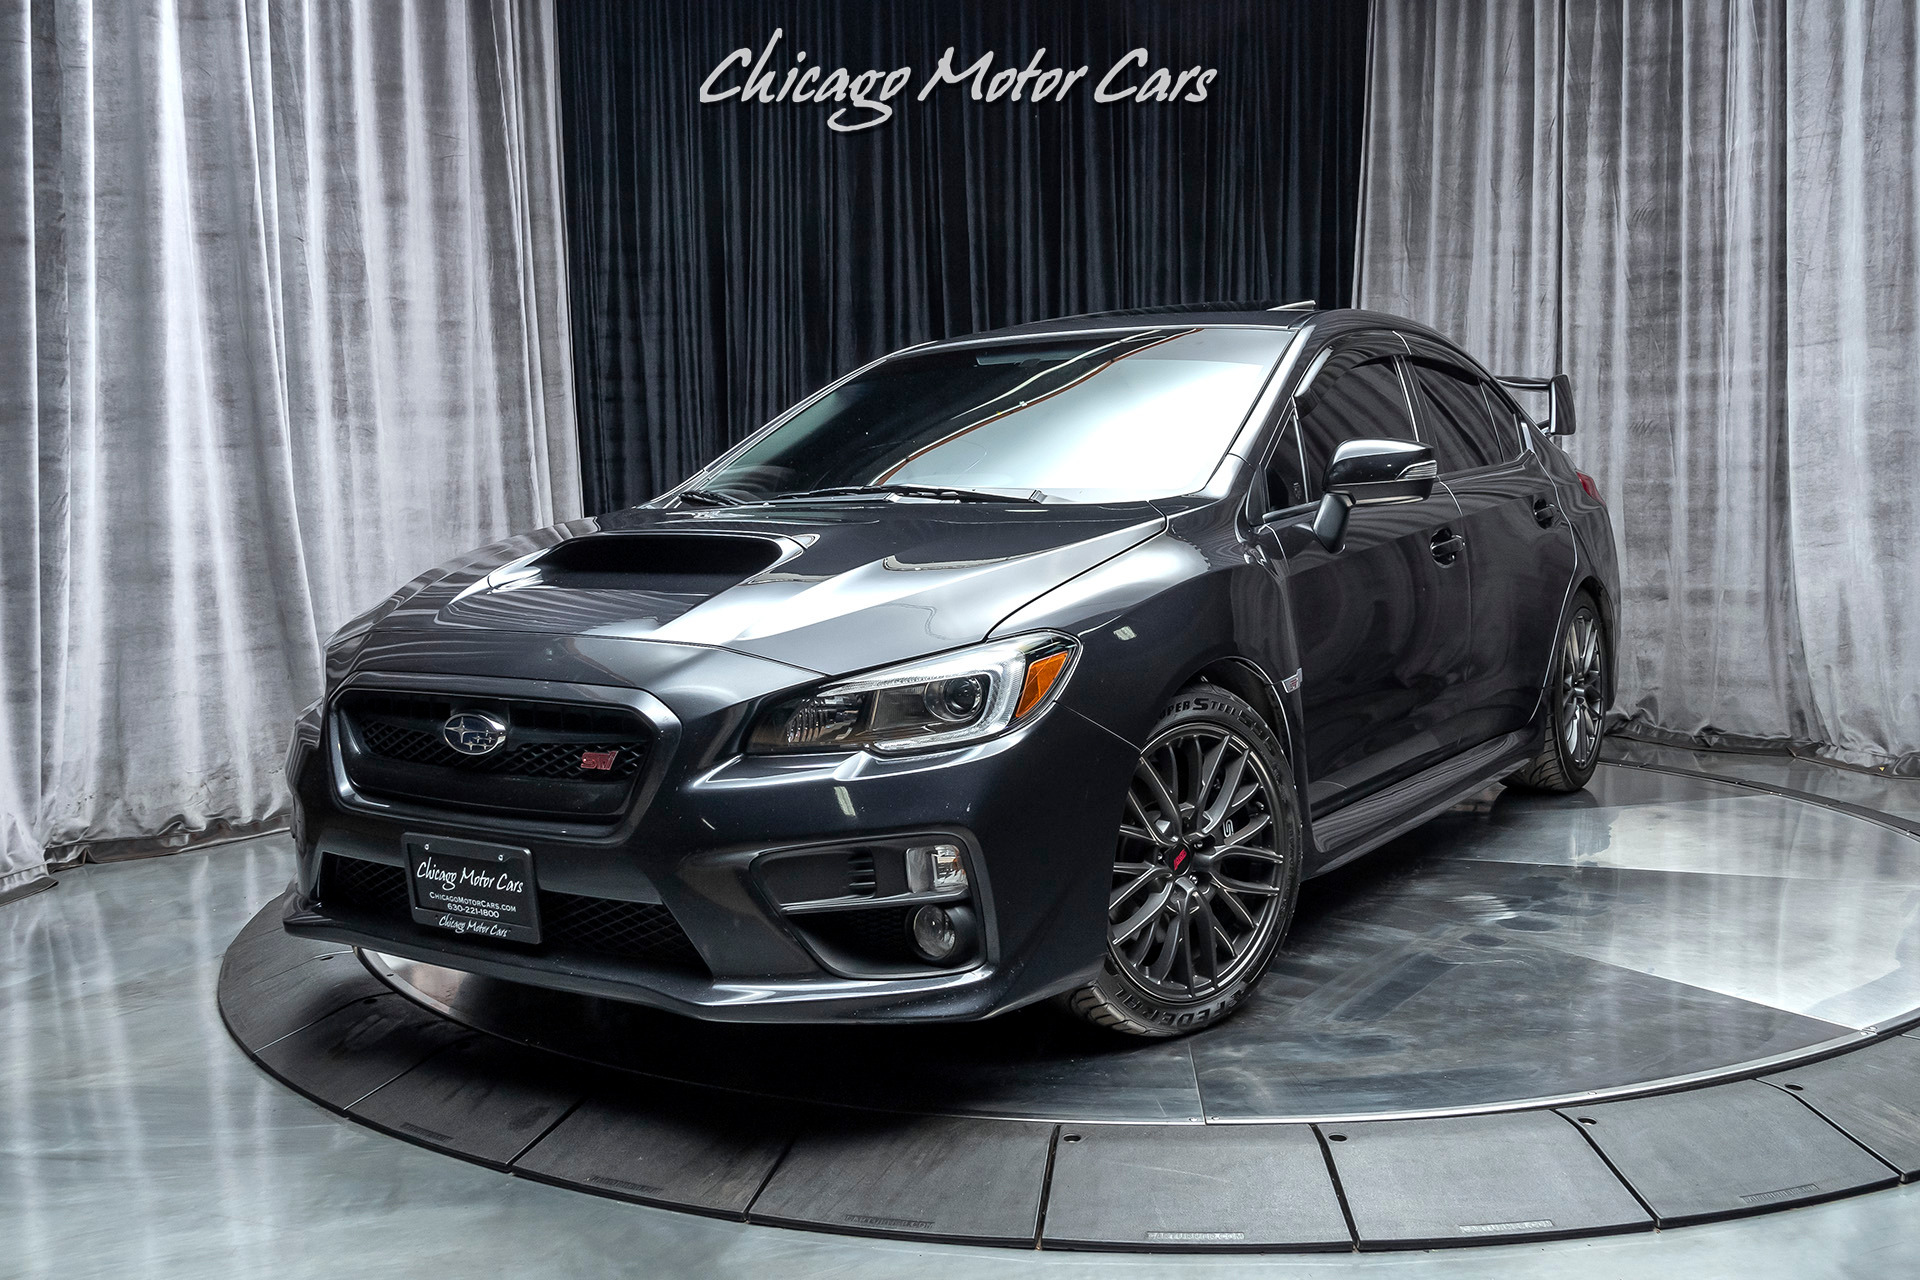 Used 15 Subaru Wrx Sti Limited Sedan Only 38k Miles Fun 6 Speed Manual For Sale Special Pricing Chicago Motor Cars Stock